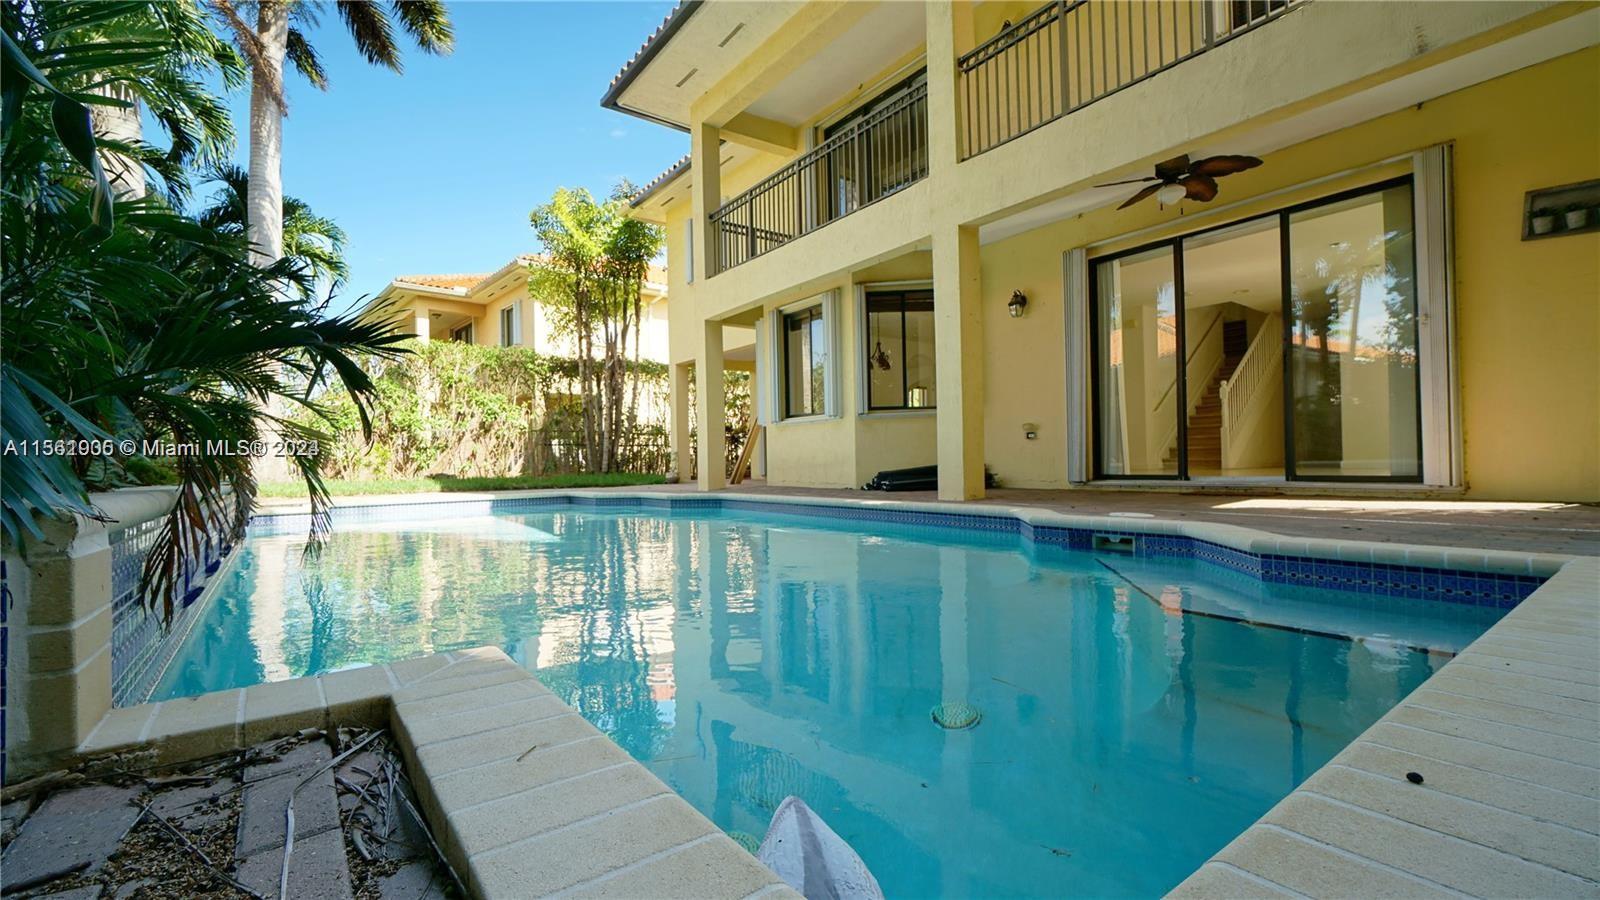 Spacious pool home in Cutler Cay! This home is the Milan model, it has 1 bedroom on the ground floor and 4 bedrooms on the 2nd floor. This home has a wonderful back patio with good size pool. Cutler Cay is a gated community, which has roaming patrol. In addition there is a community club house over looking a lake. The club house has lots of activities, and amenities to enjoy including tennis, etc.